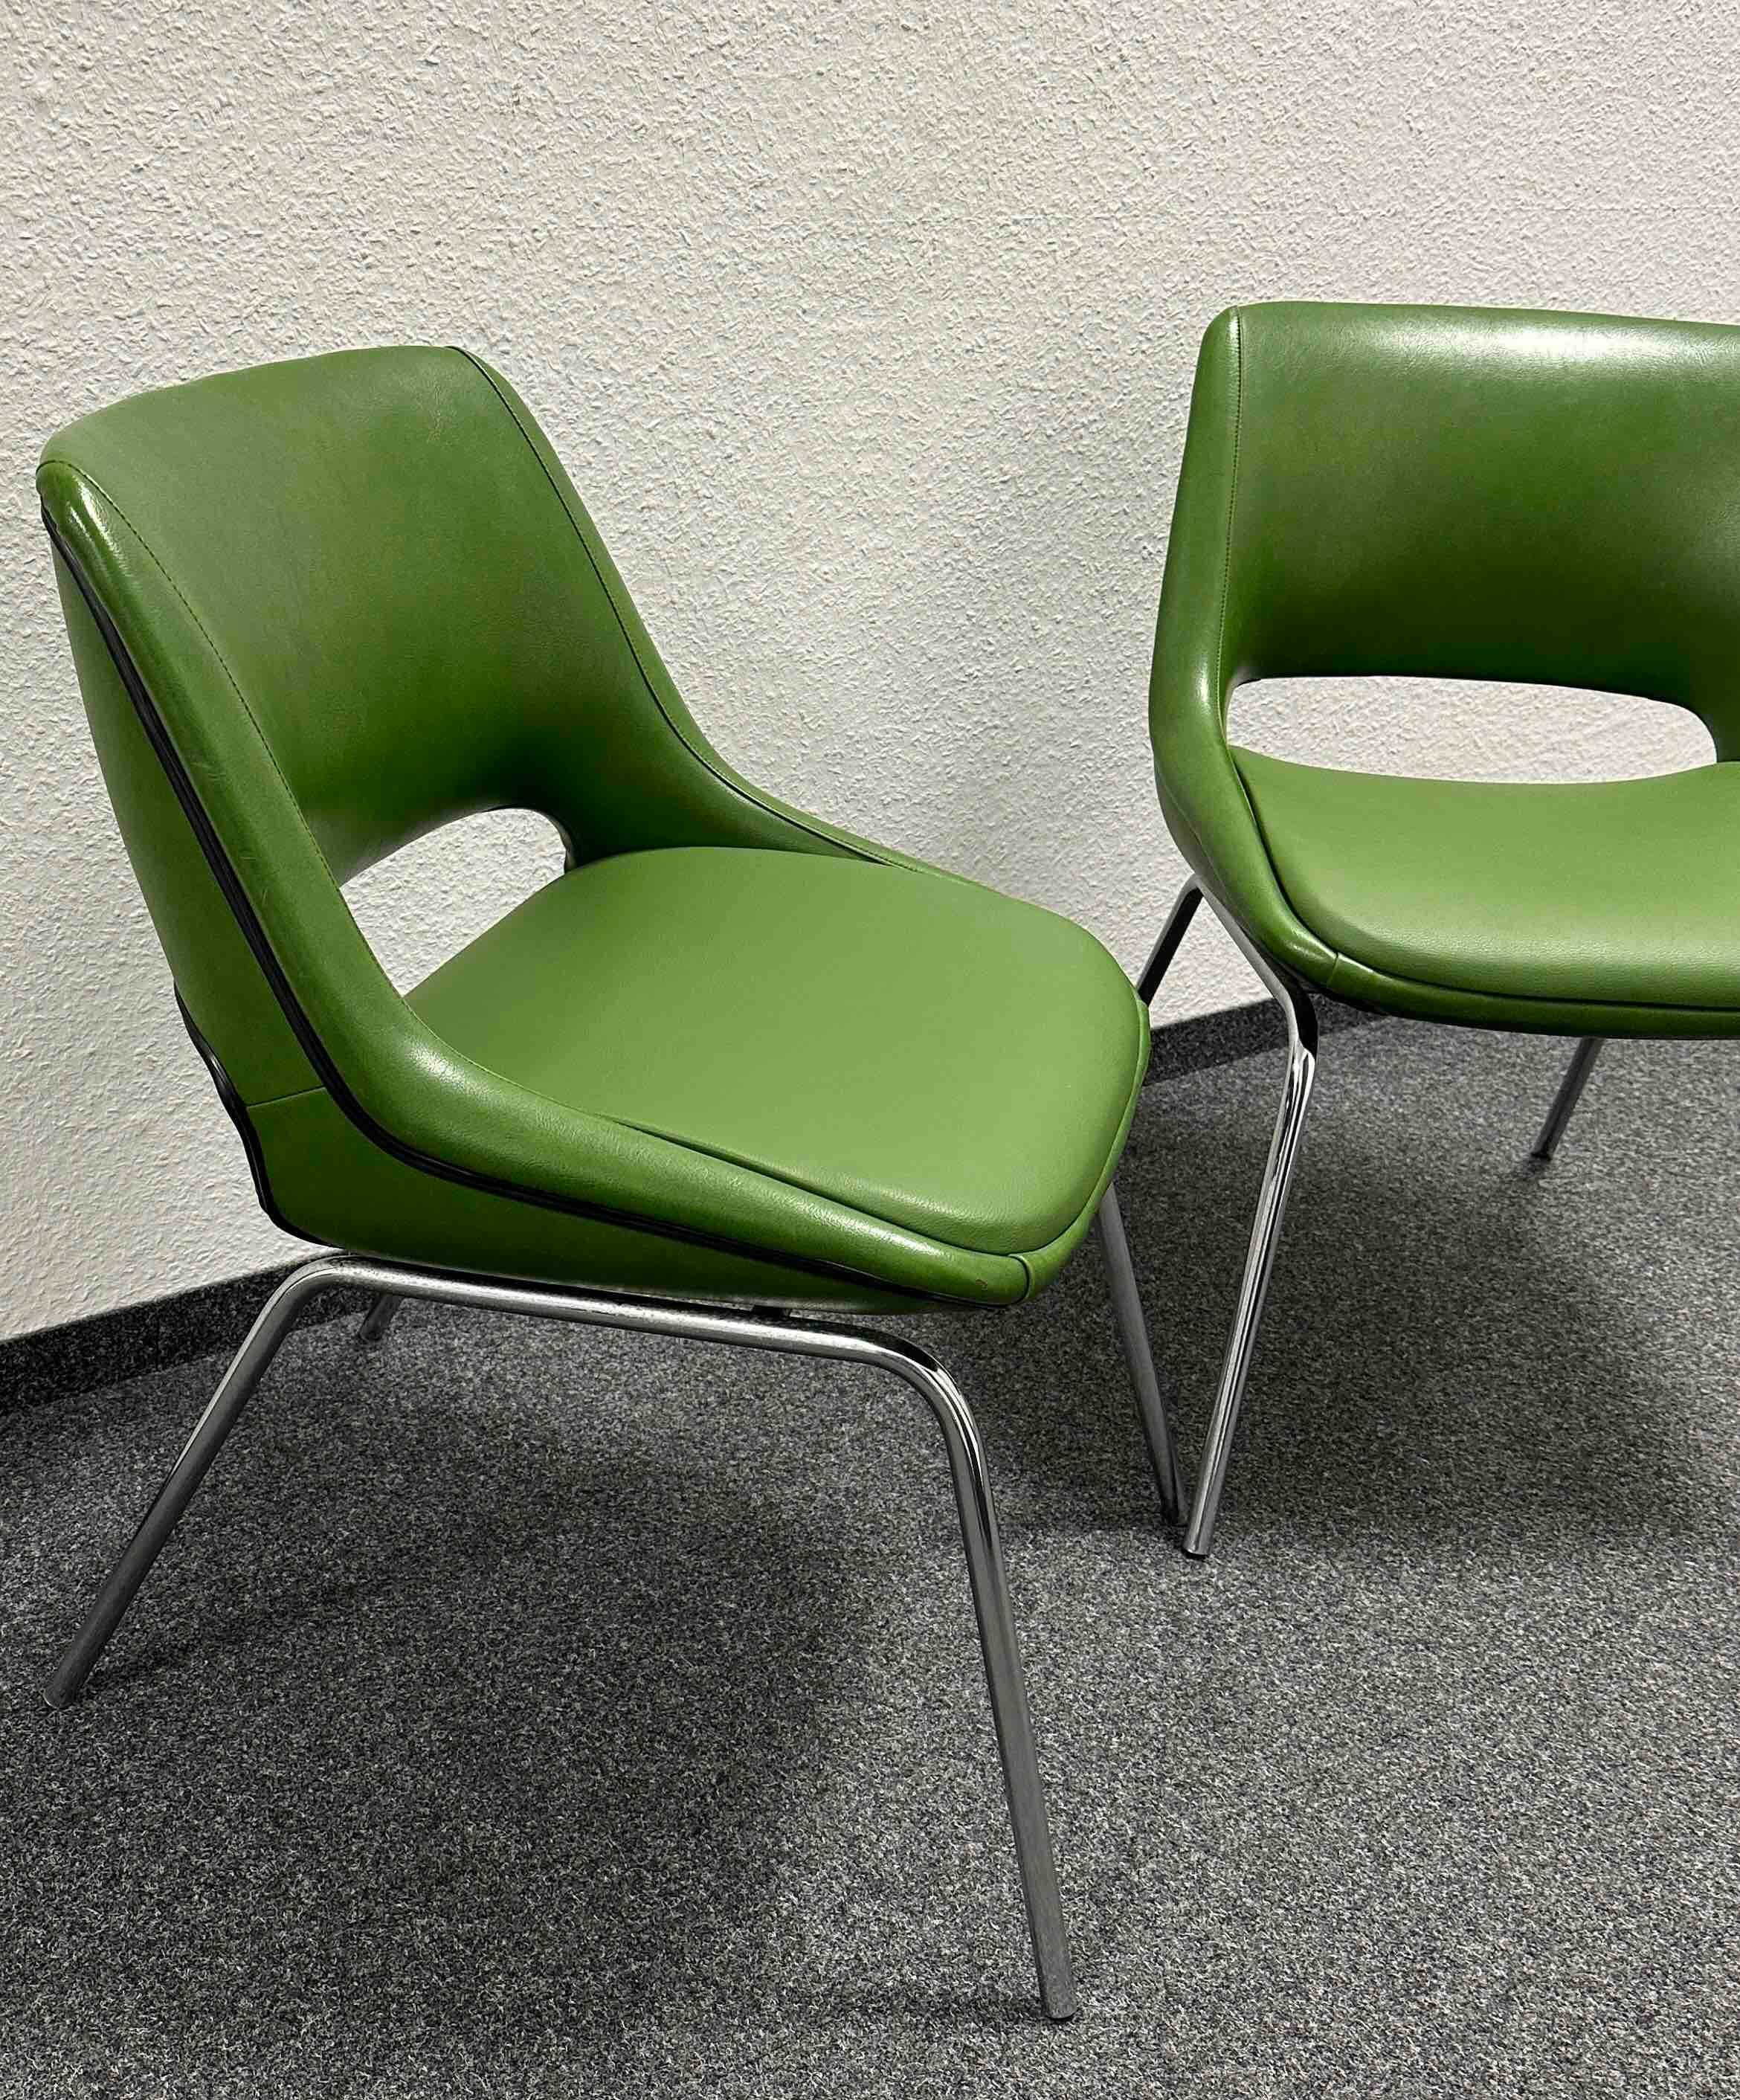 Two Chrome Base, Green Faux Leather Chairs Made by Blaha, Austria, 1970s For Sale 9